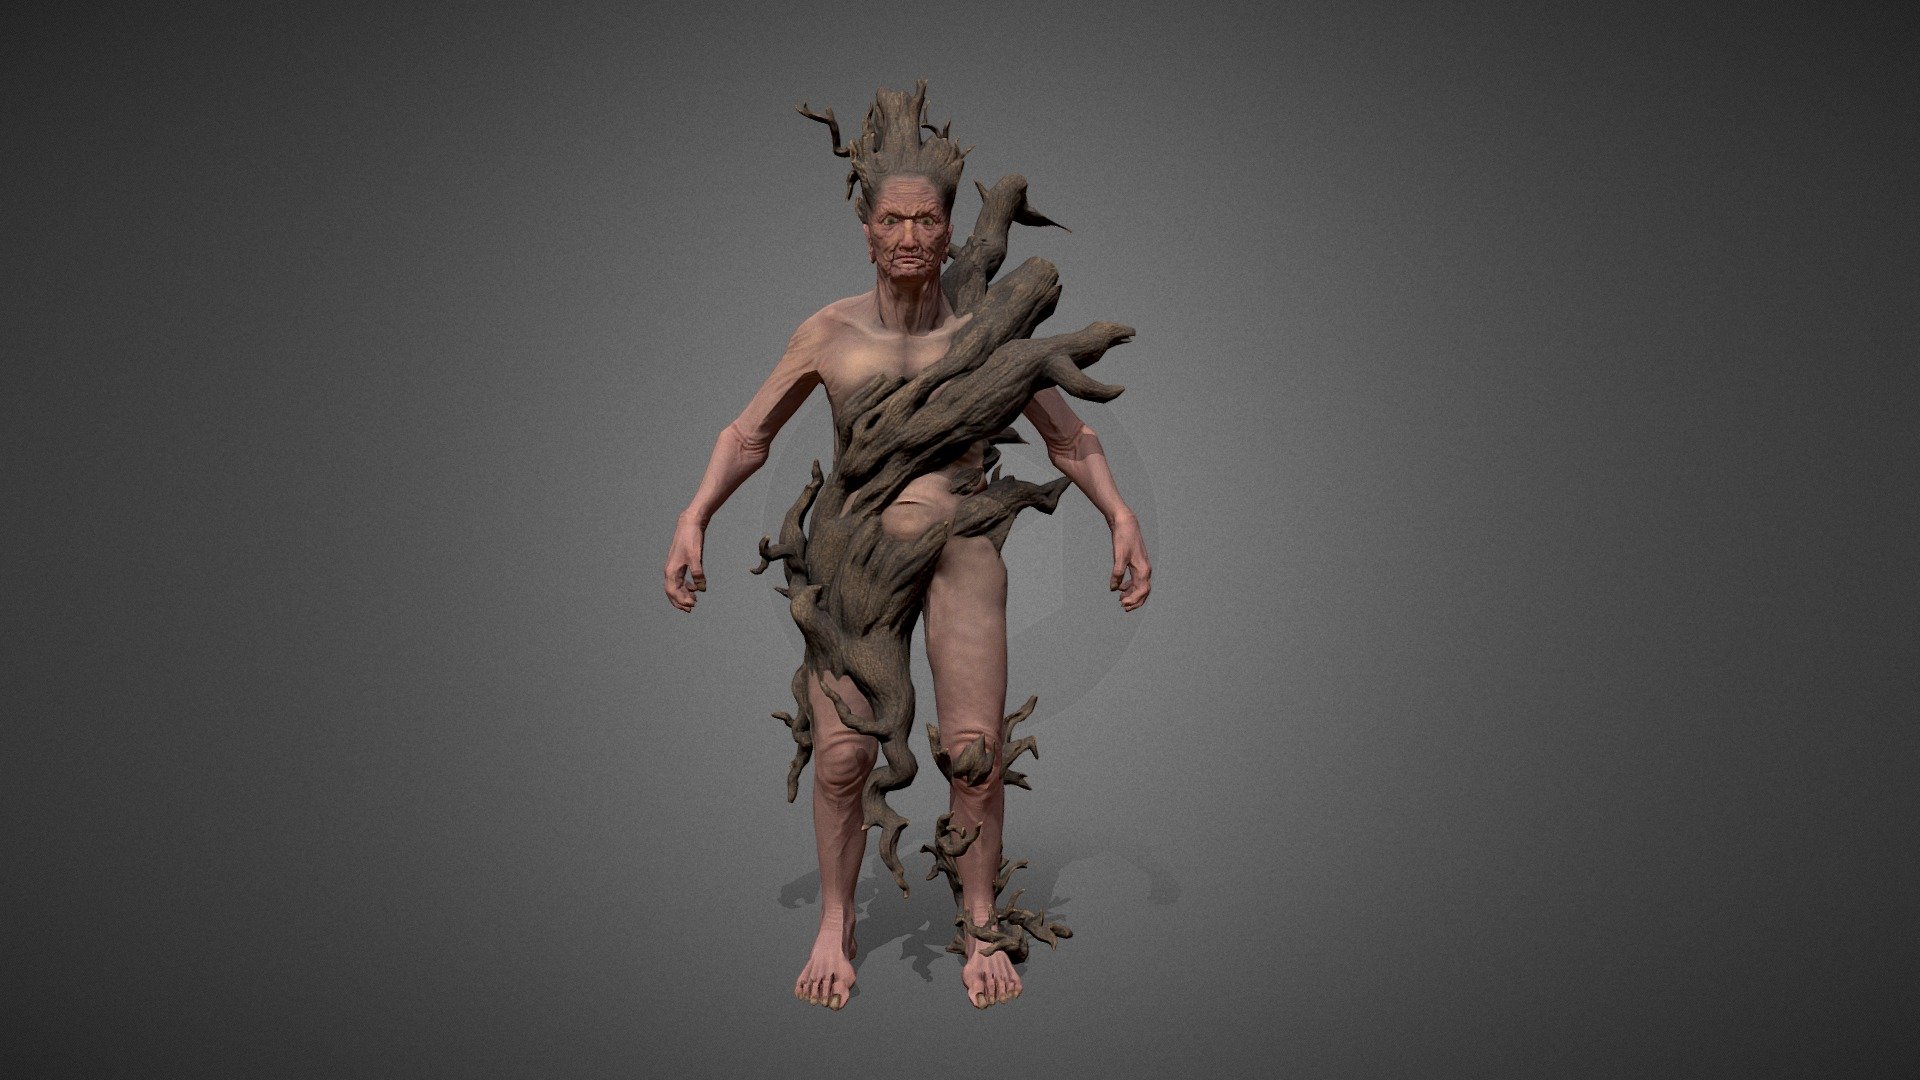 Old Dryad PBR low-poly game ready. faces 15021 vertex 14488

Highly detailed game-ready model. You can use him in your own games. Model has rigging+ skining im Maya. No animation. PBR textures (Metallic-Roughness) 4096x4096. OpenGL Normal Maps. .TIFF format. Include Marmoset files with material and studio lighting setup. Maya scene (3.08) Textures have 3 cards: Base color (which includes the scattering). Normal map Rough+metall+AO(chanel G|B|R) - Old Dryad - Buy Royalty Free 3D model by RivierKlee 3d model